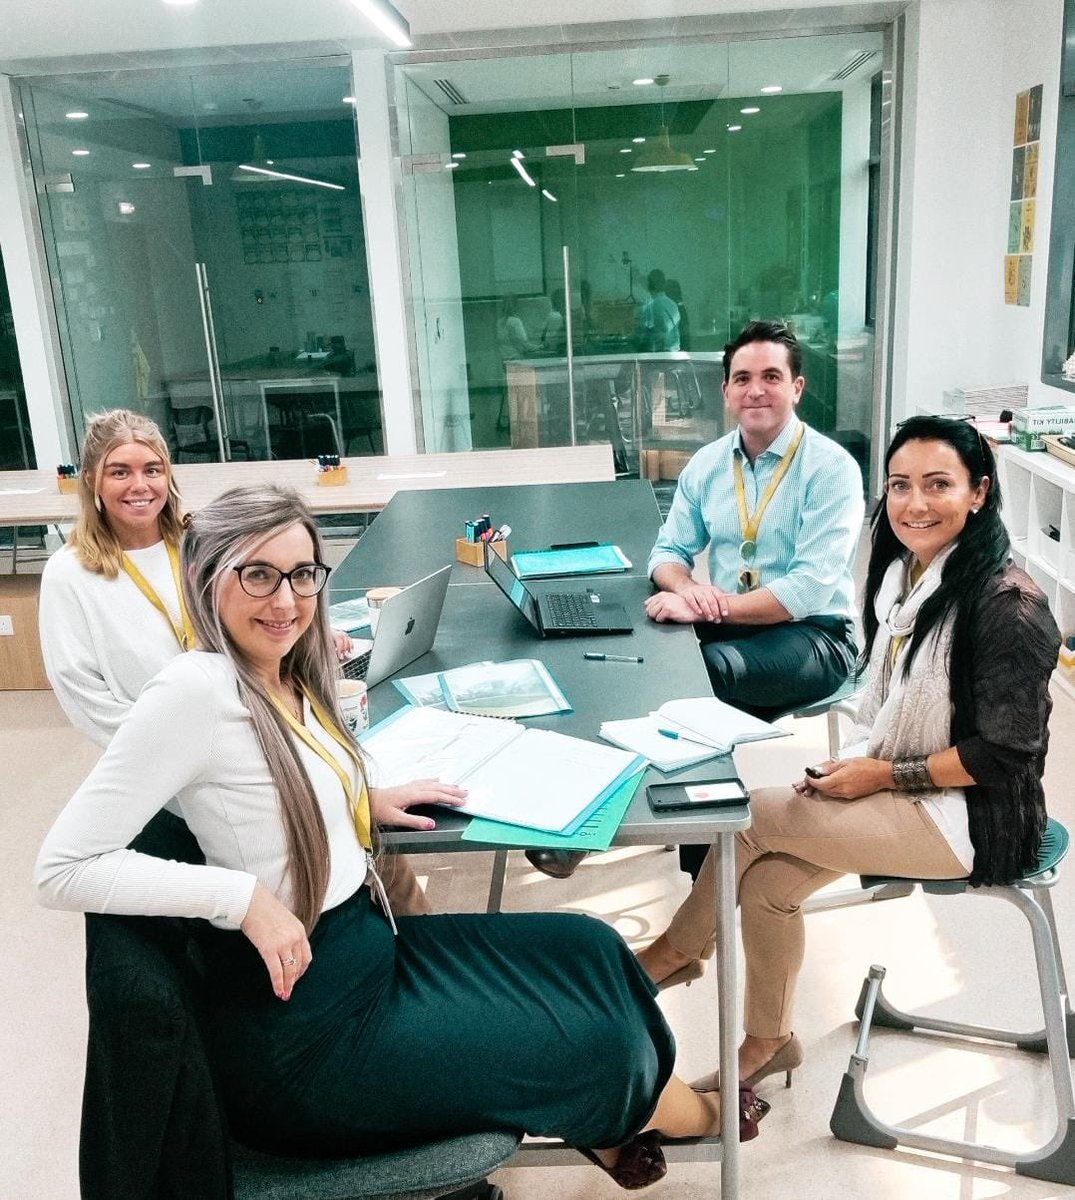 Members of The Arbor School Dubai  Sustainability Committee meet to discuss communicating and acting on the school's sustainability review recommendations, researched and published by Metanoia.

 #whatwillyoudo for net zero?